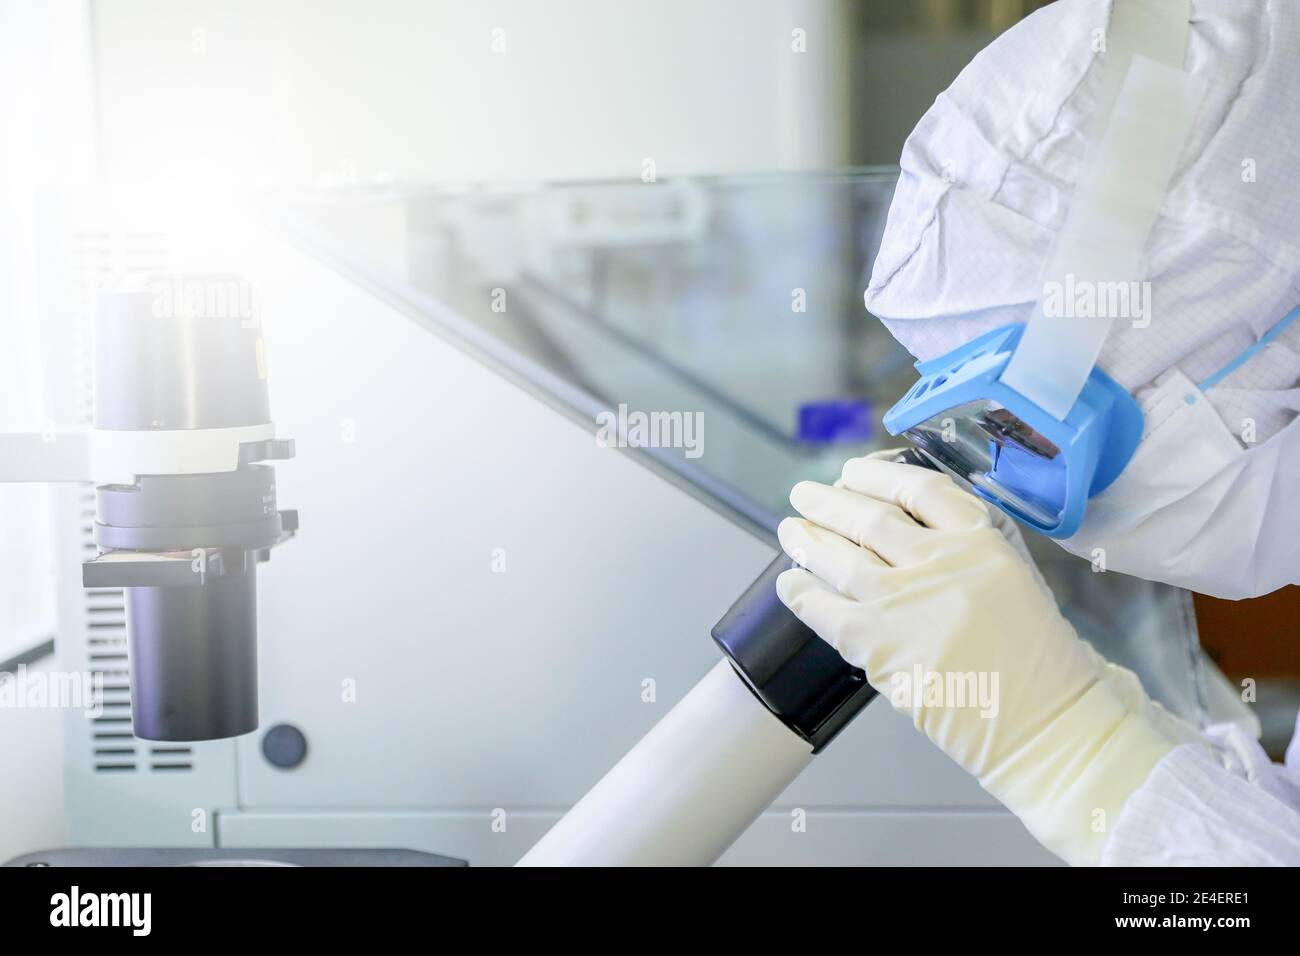 Lab scientists wear protective clothing looking for microscopes while doing medical research in a laboratory. Stock Photo